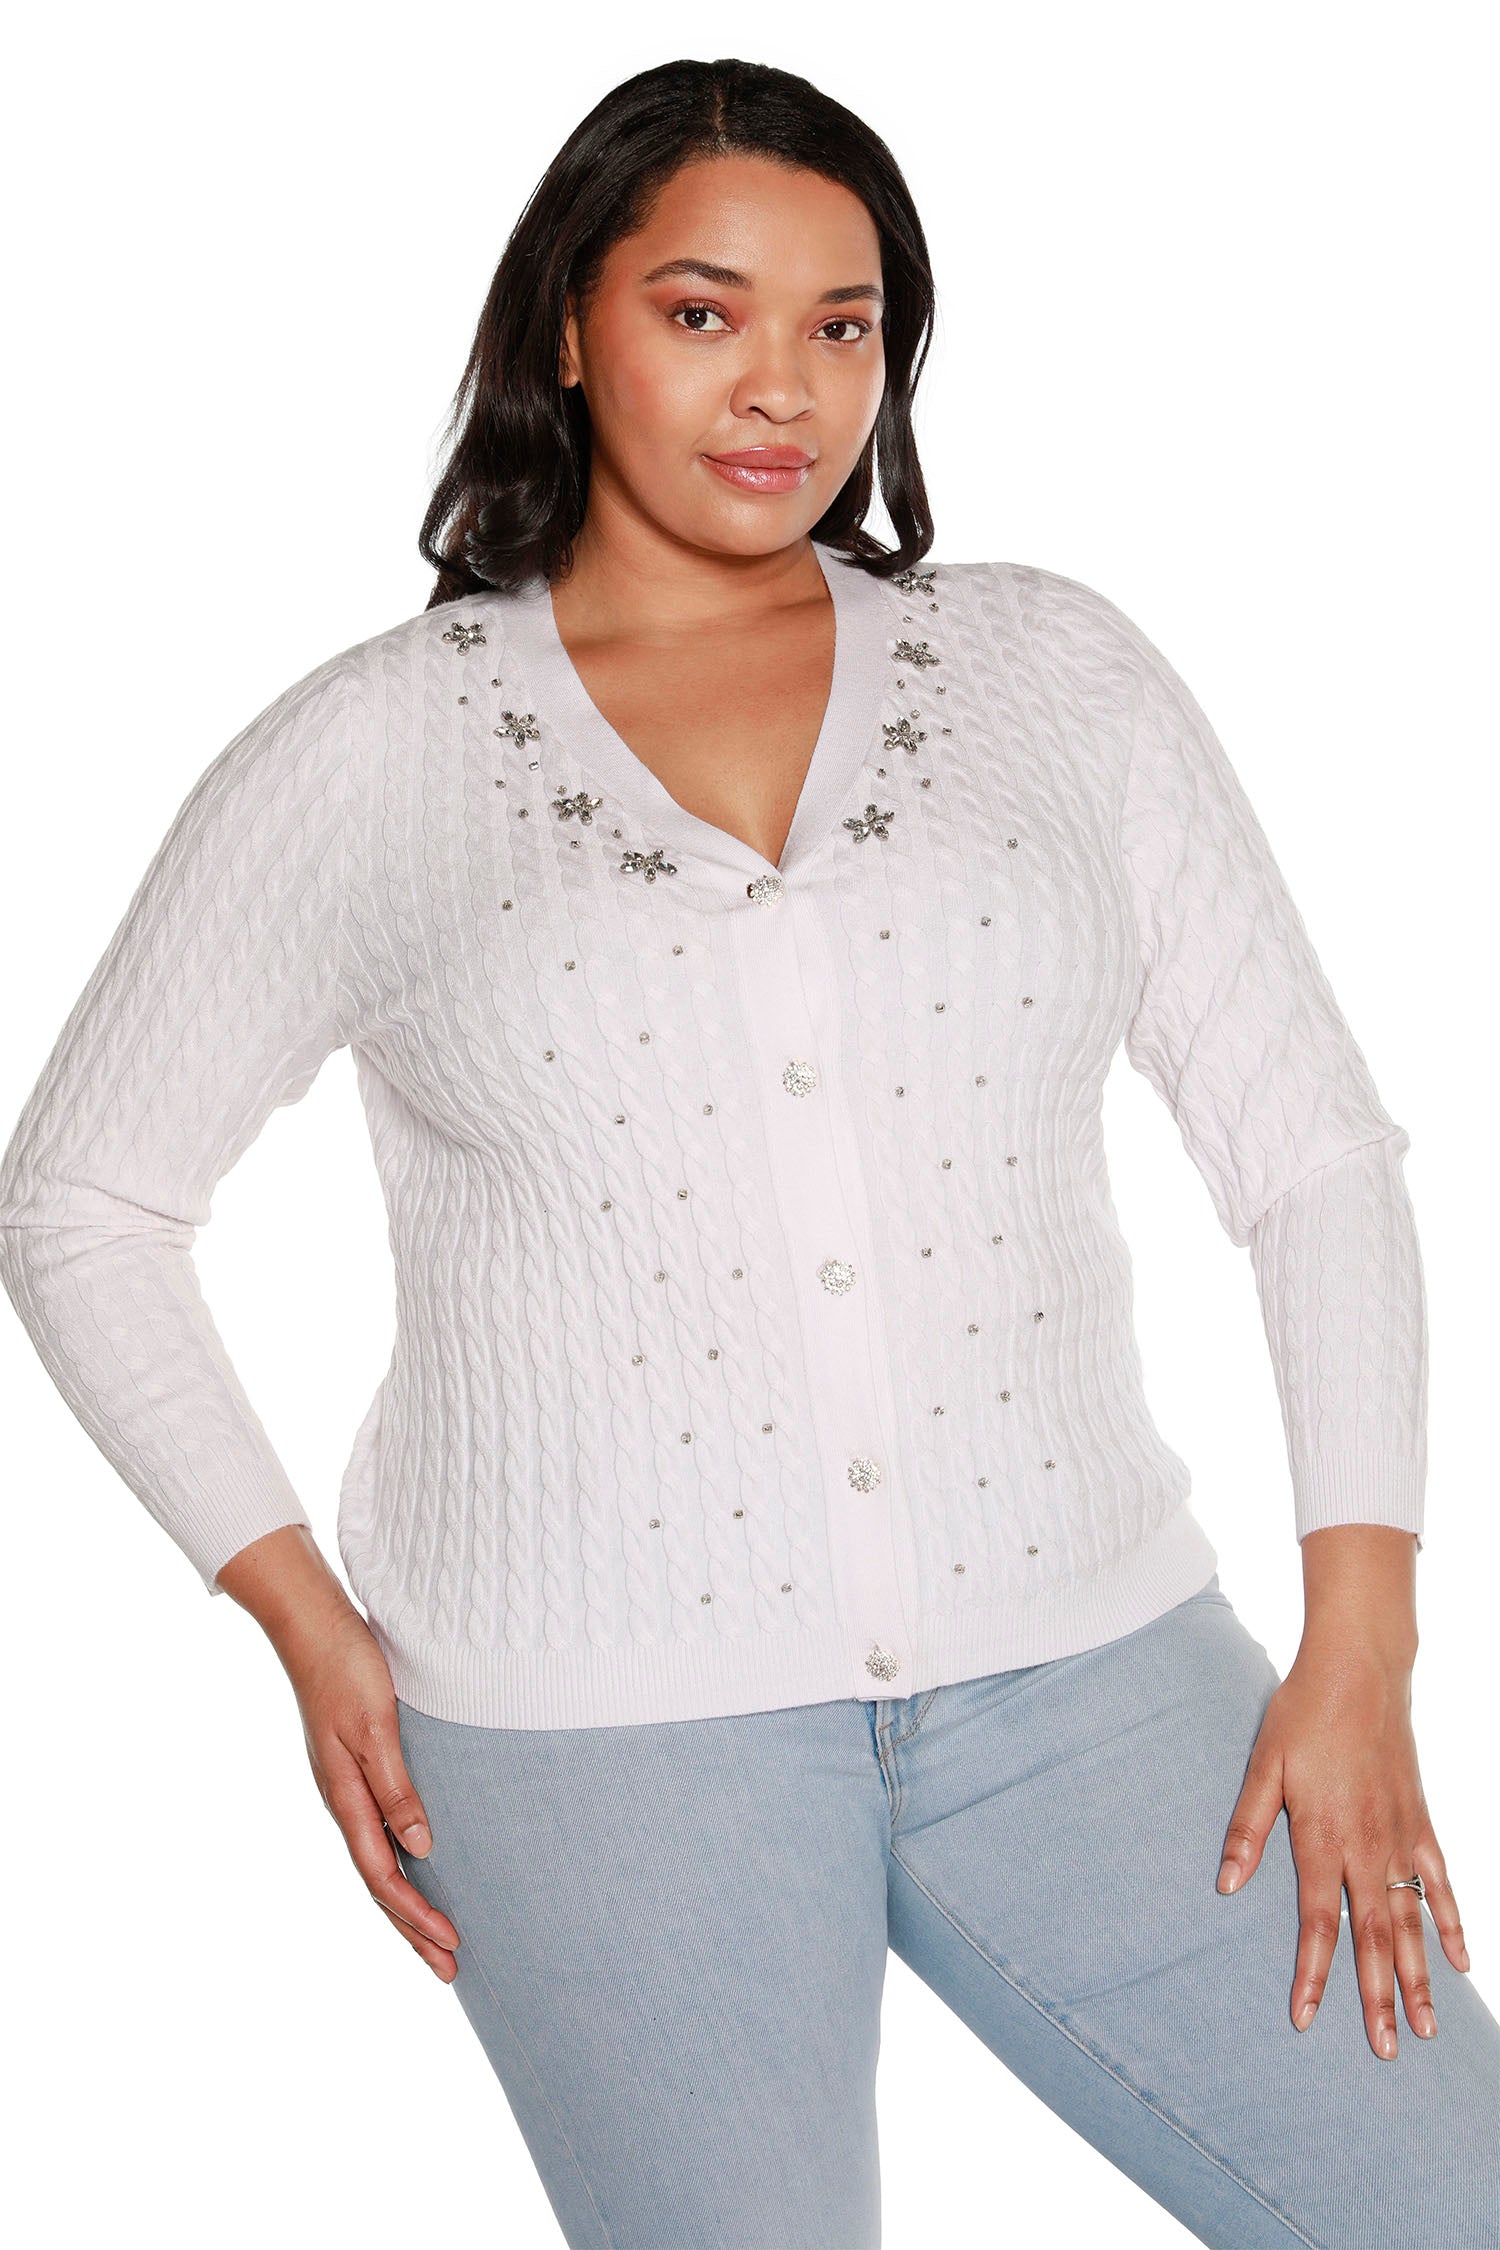 Women’s Rhinestone Embellished Delicate Cable Knit Cropped Cardigan | Curvy